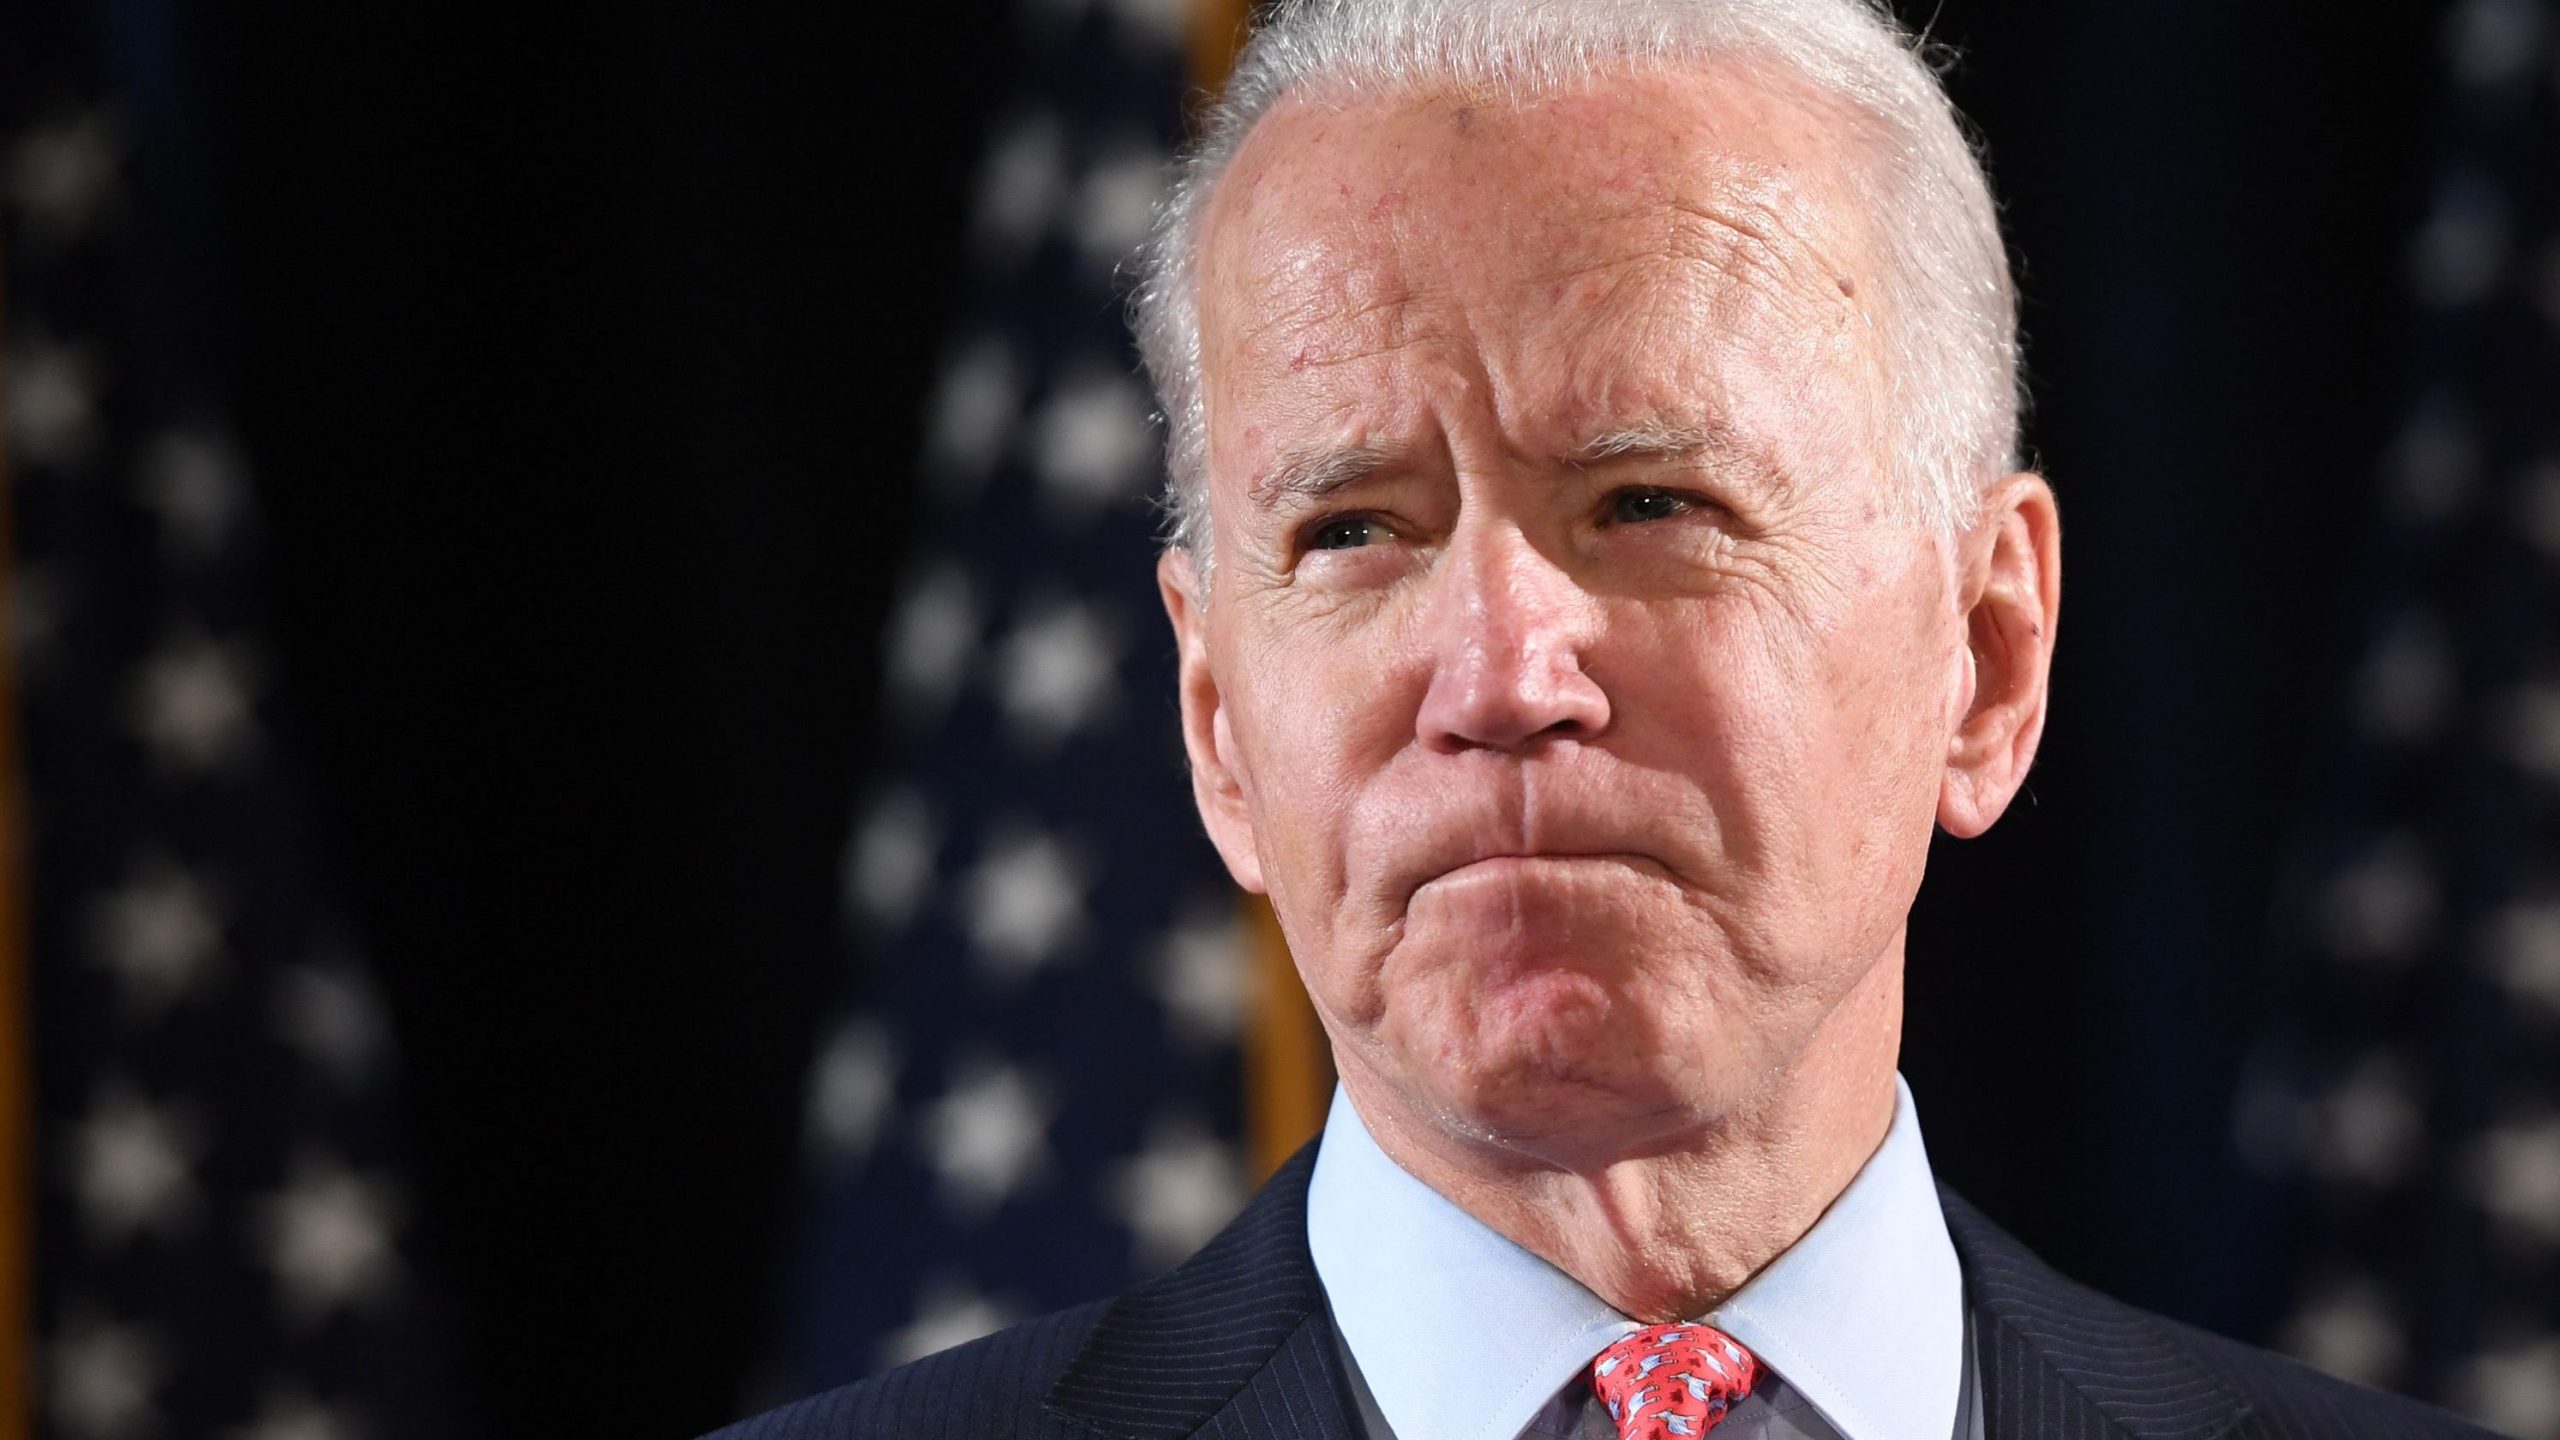 Why I’m skeptical about Reade’s sexual assault claim against Biden: Ex-prosecutor